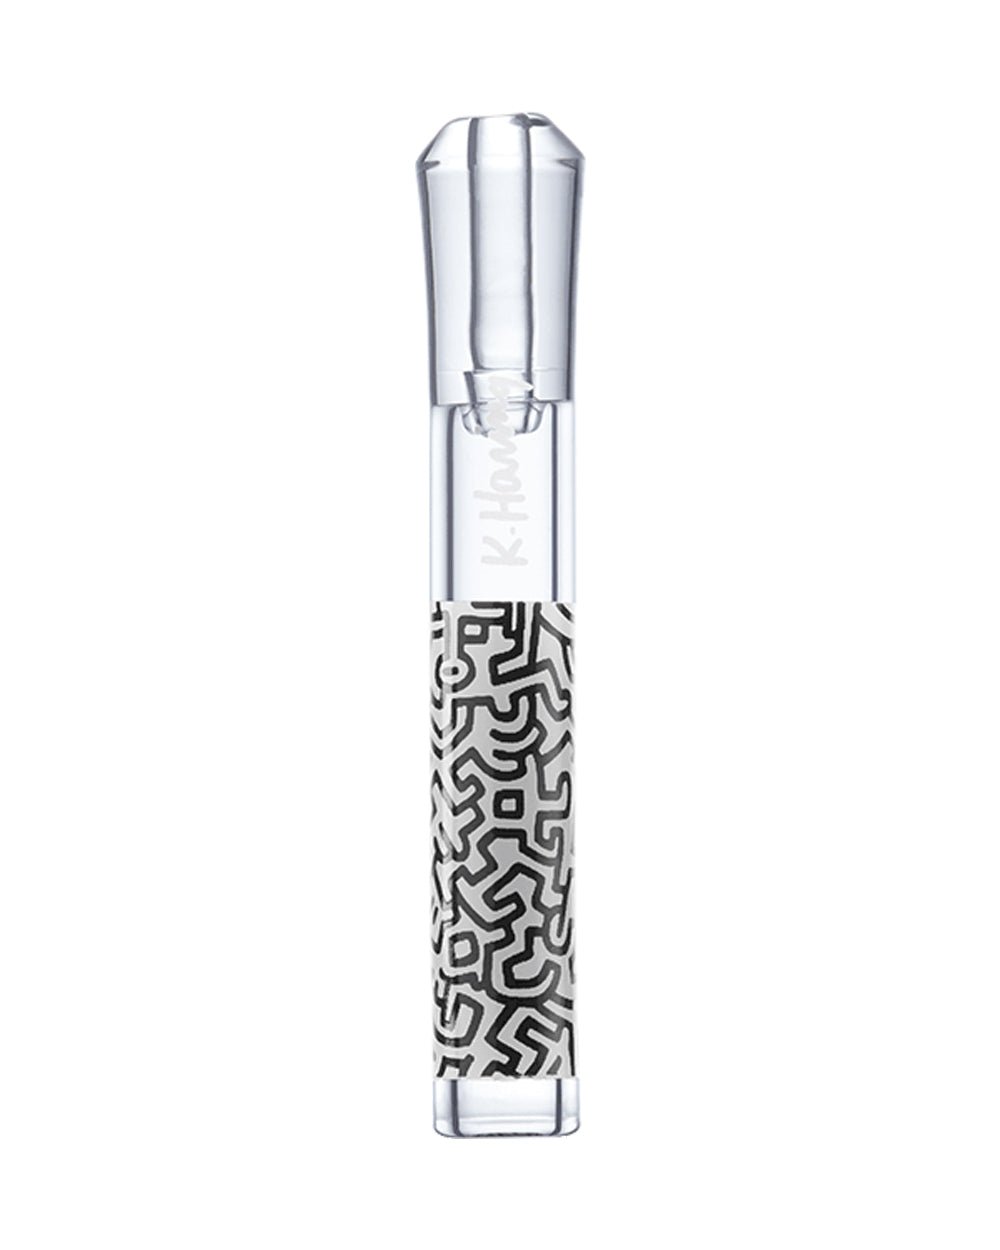 Keith Haring | Glass Taster Chillum Hand Pipe | 3in Long - Glass - Black & White - 1